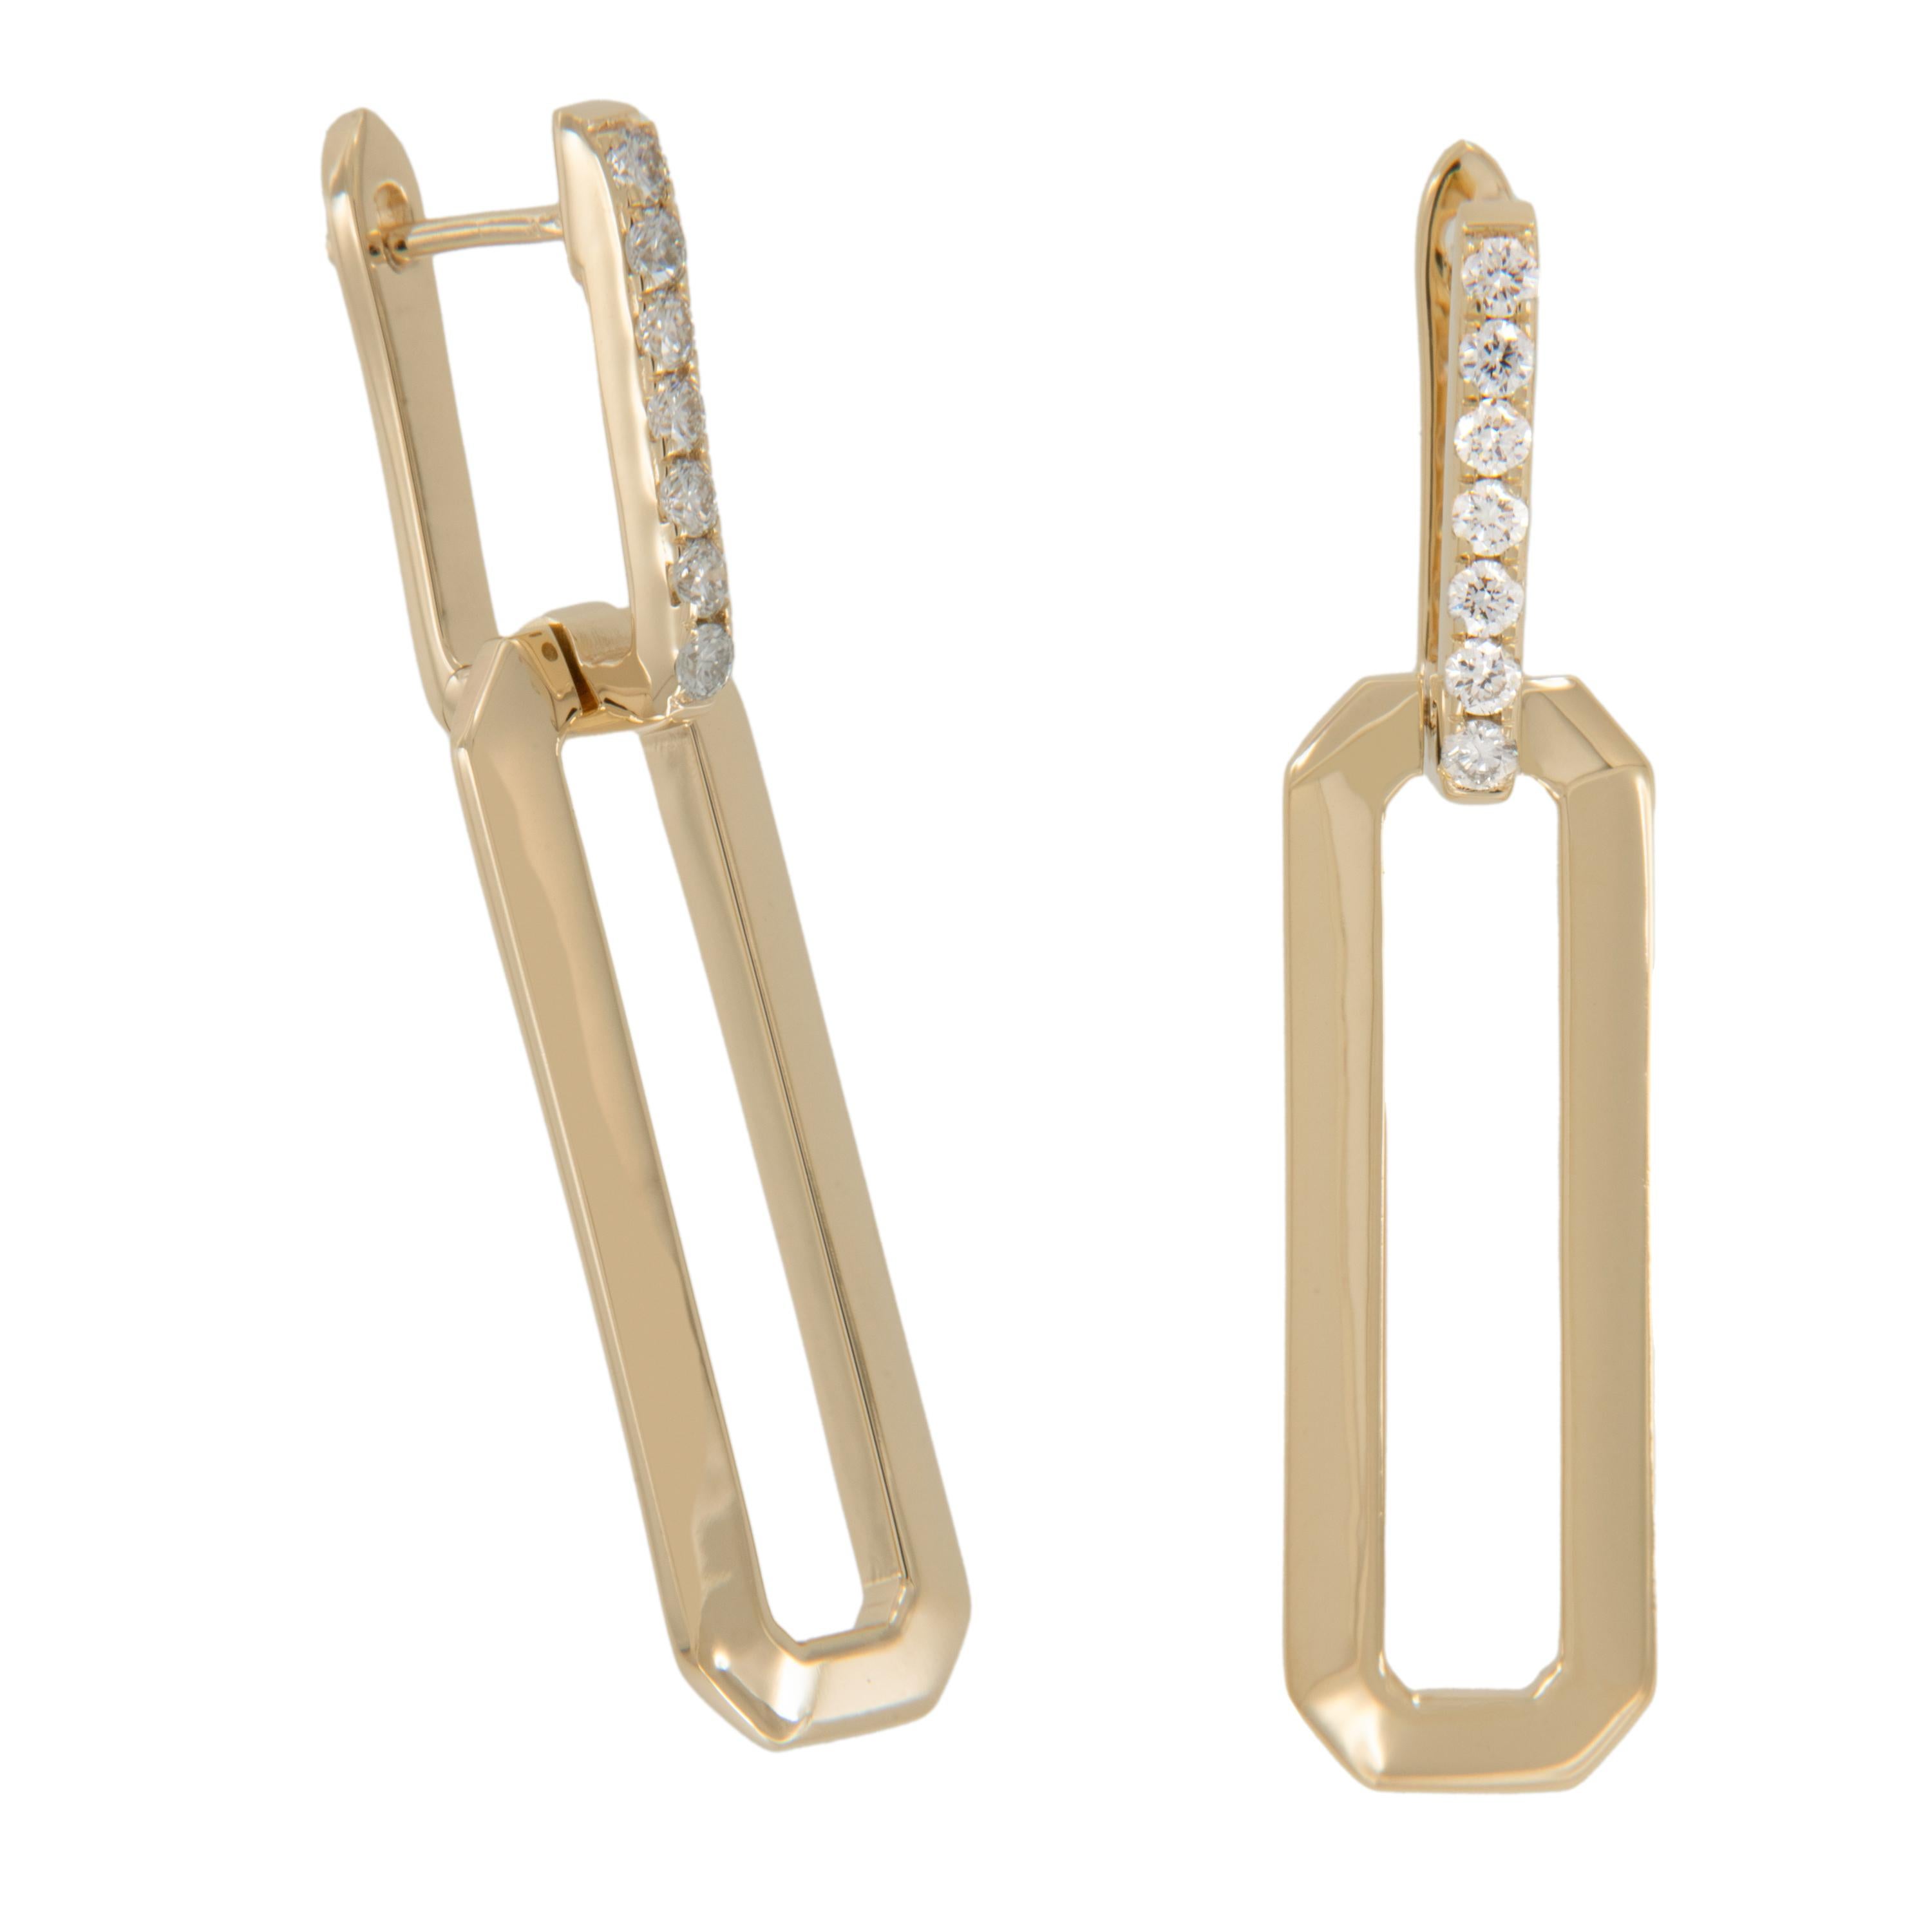 Fashion forward! These beautiful 14 karat yellow gold rectangle dangle door knocker style earrings are stunning! Accented with 0.36 Cttw diamonds at the top to catch the light, these are so fun to wear! Complimentary signature wrapping &